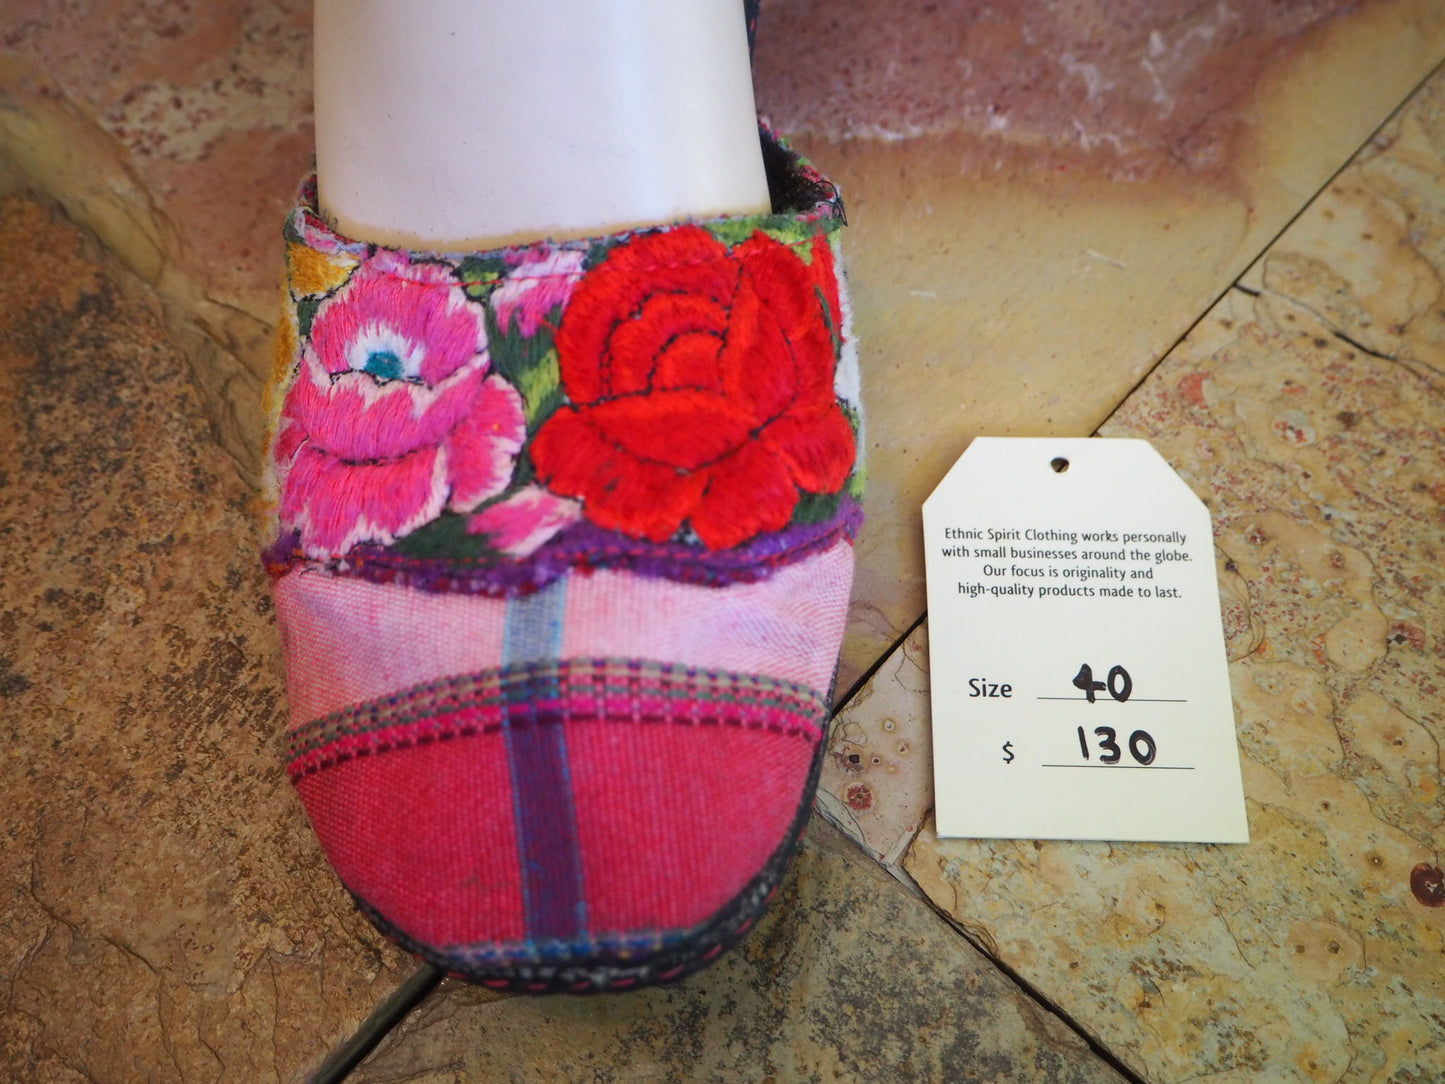 Size 40 Ballerina Sandals - Red and Pink Roses